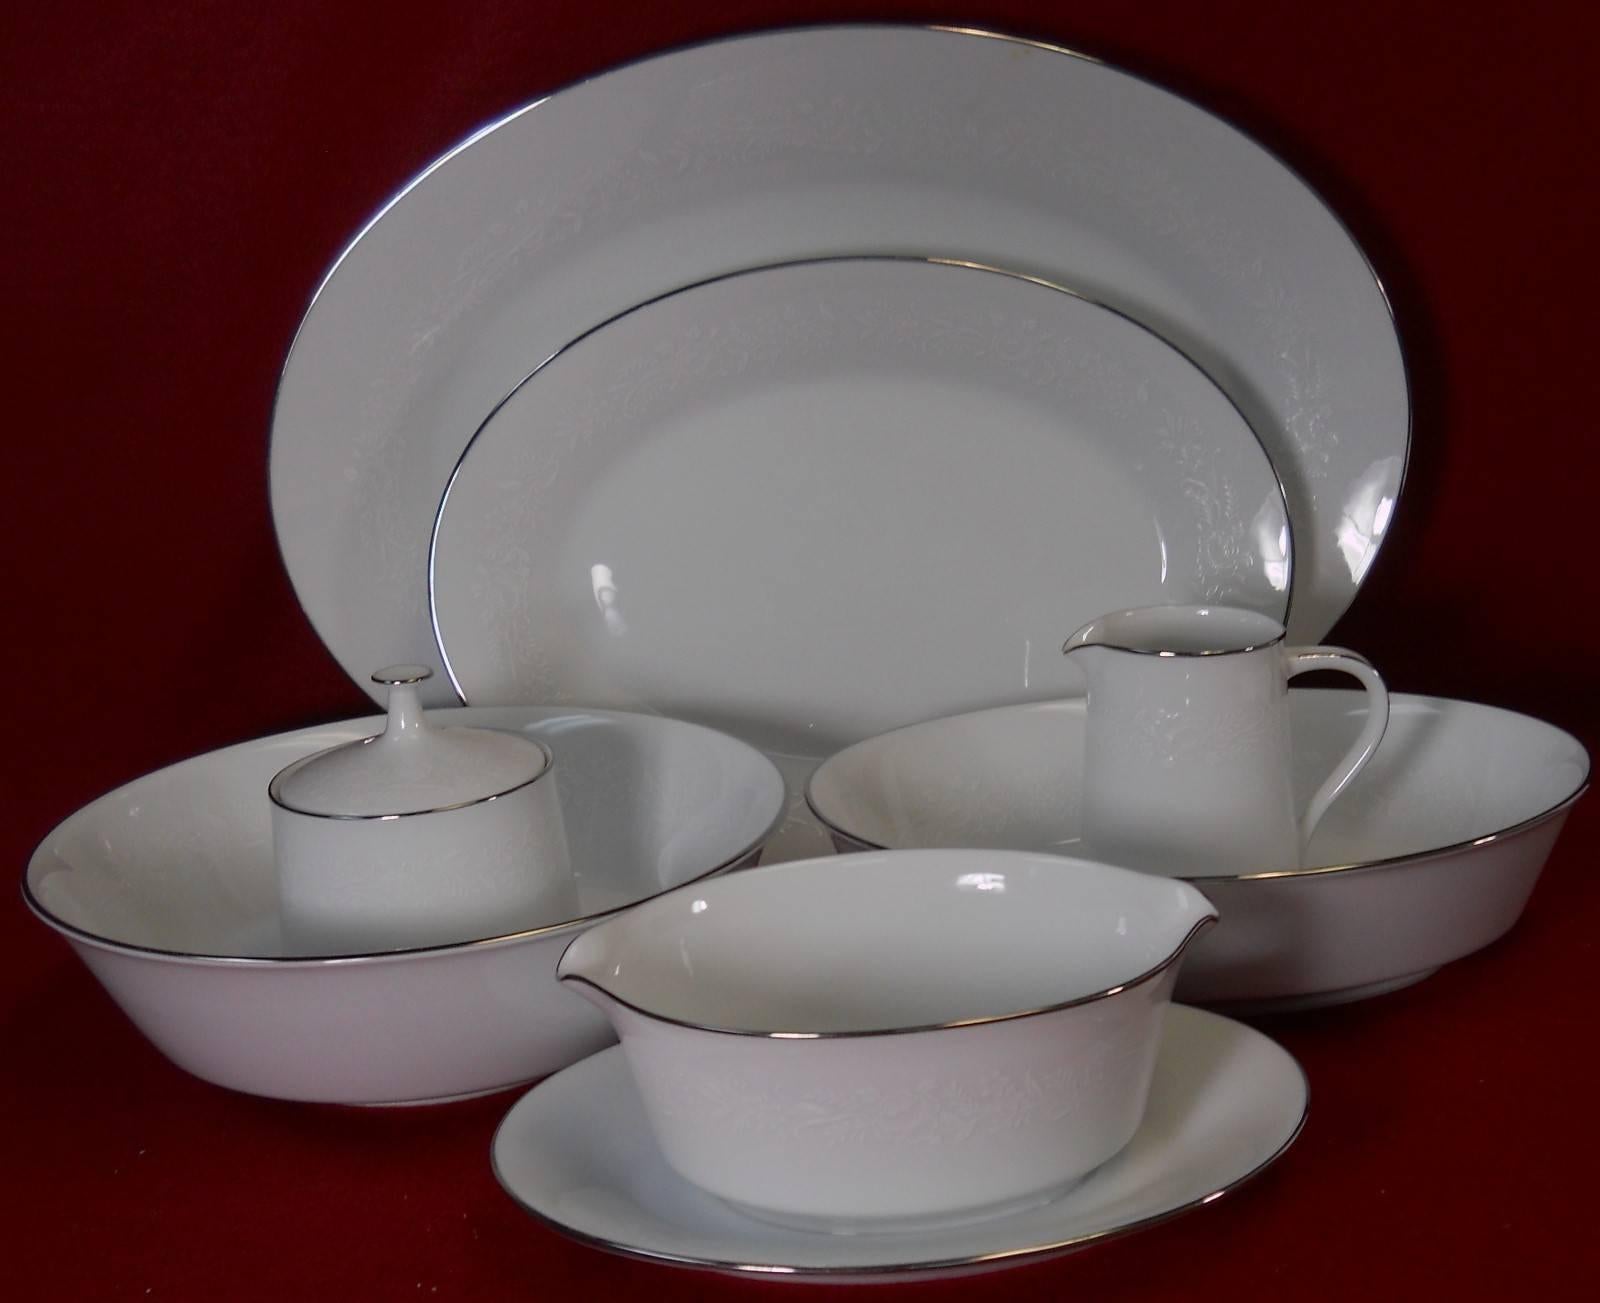 Noritake China Reina 6450Q pattern 104-piece set service for 12.

In great condition free from chips, cracks, break, stain, or discoloration and with only a minimum of use. 

Production dates 1963-1983. 

Includes 18 cups, 18 saucers, 12